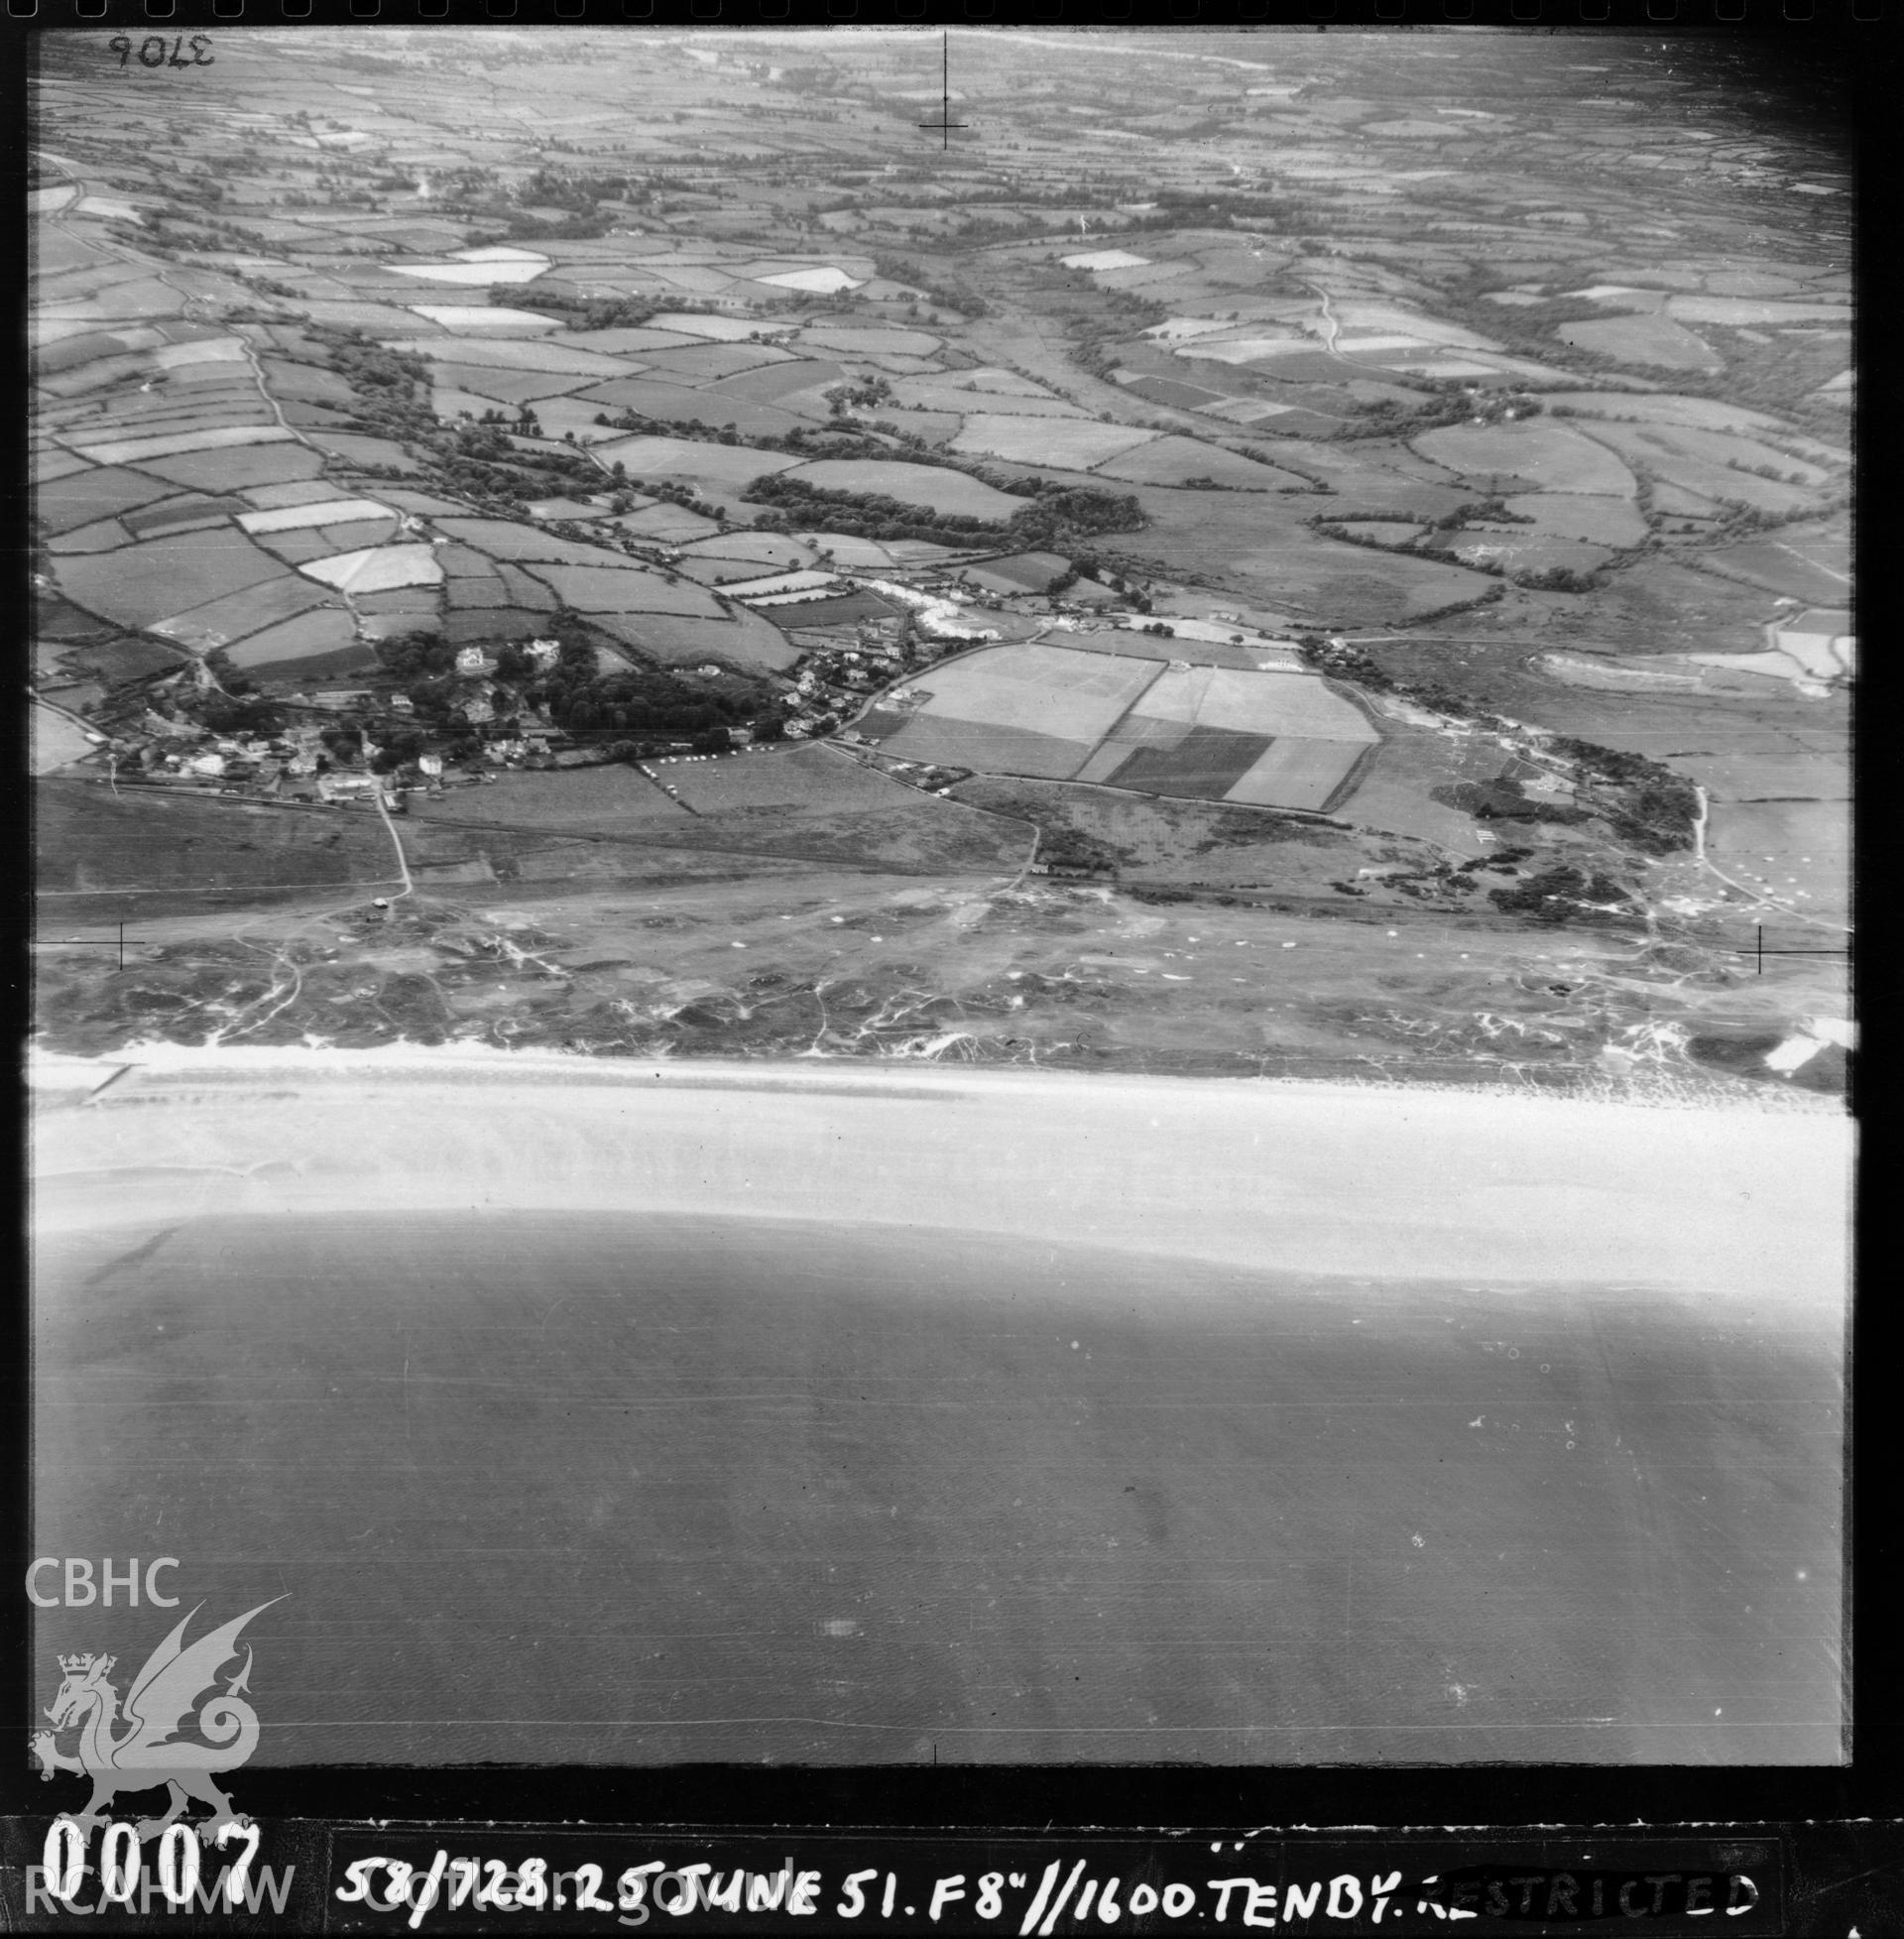 Black and white vertical aerial photograph taken by the RAF on 03/06/1951 showing the Tenby area.